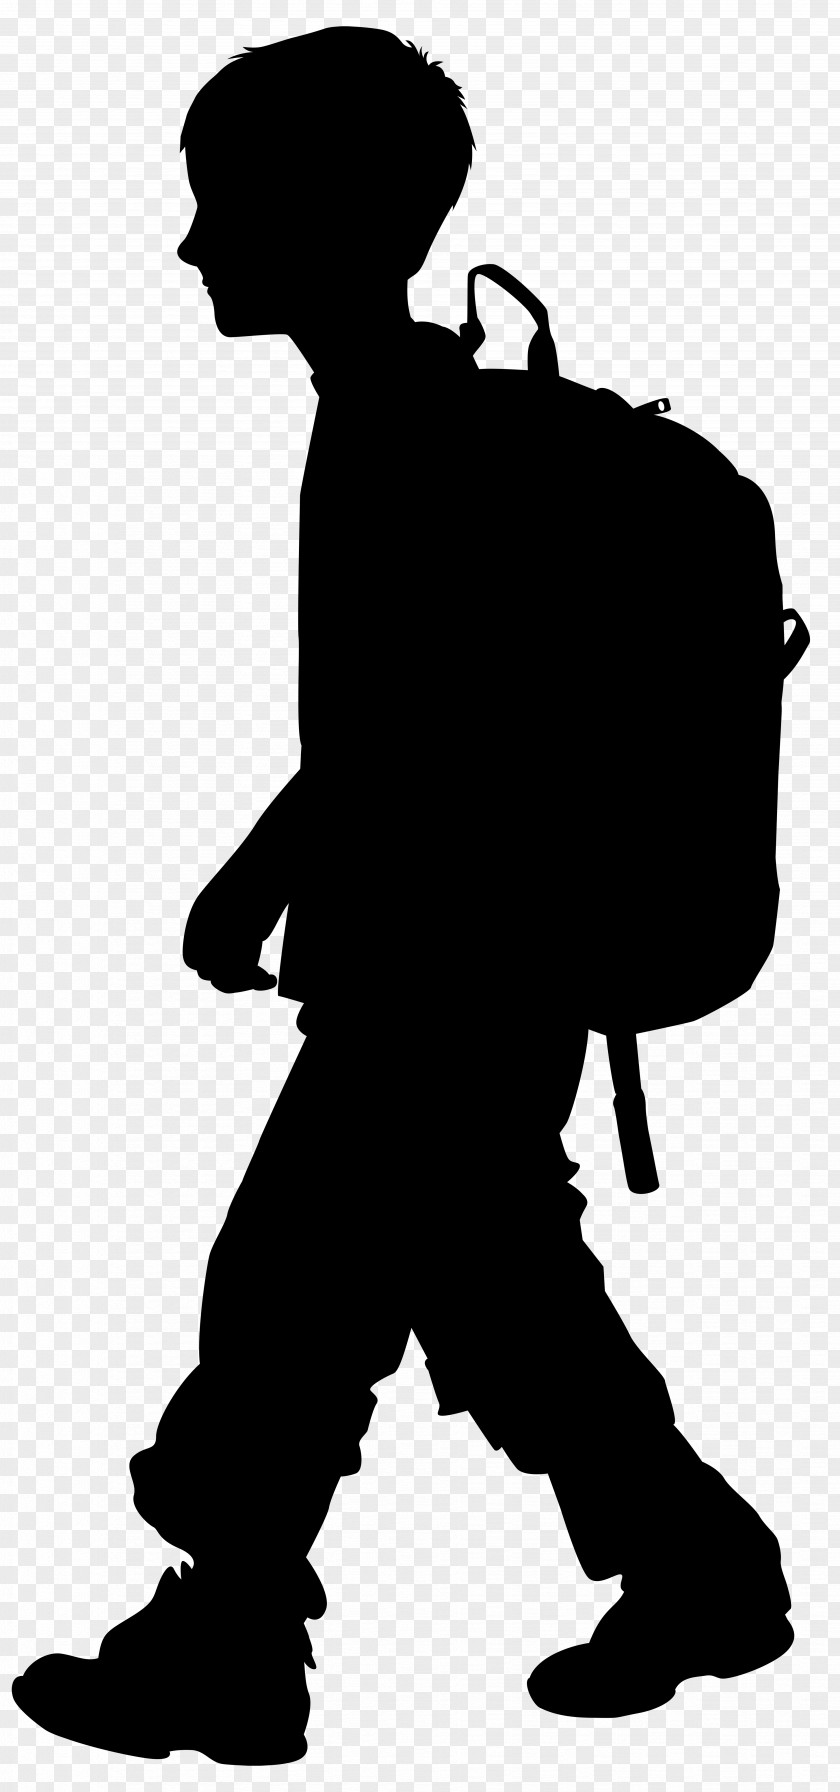 Boy With Backpack Silhouette Clip Art Image PNG